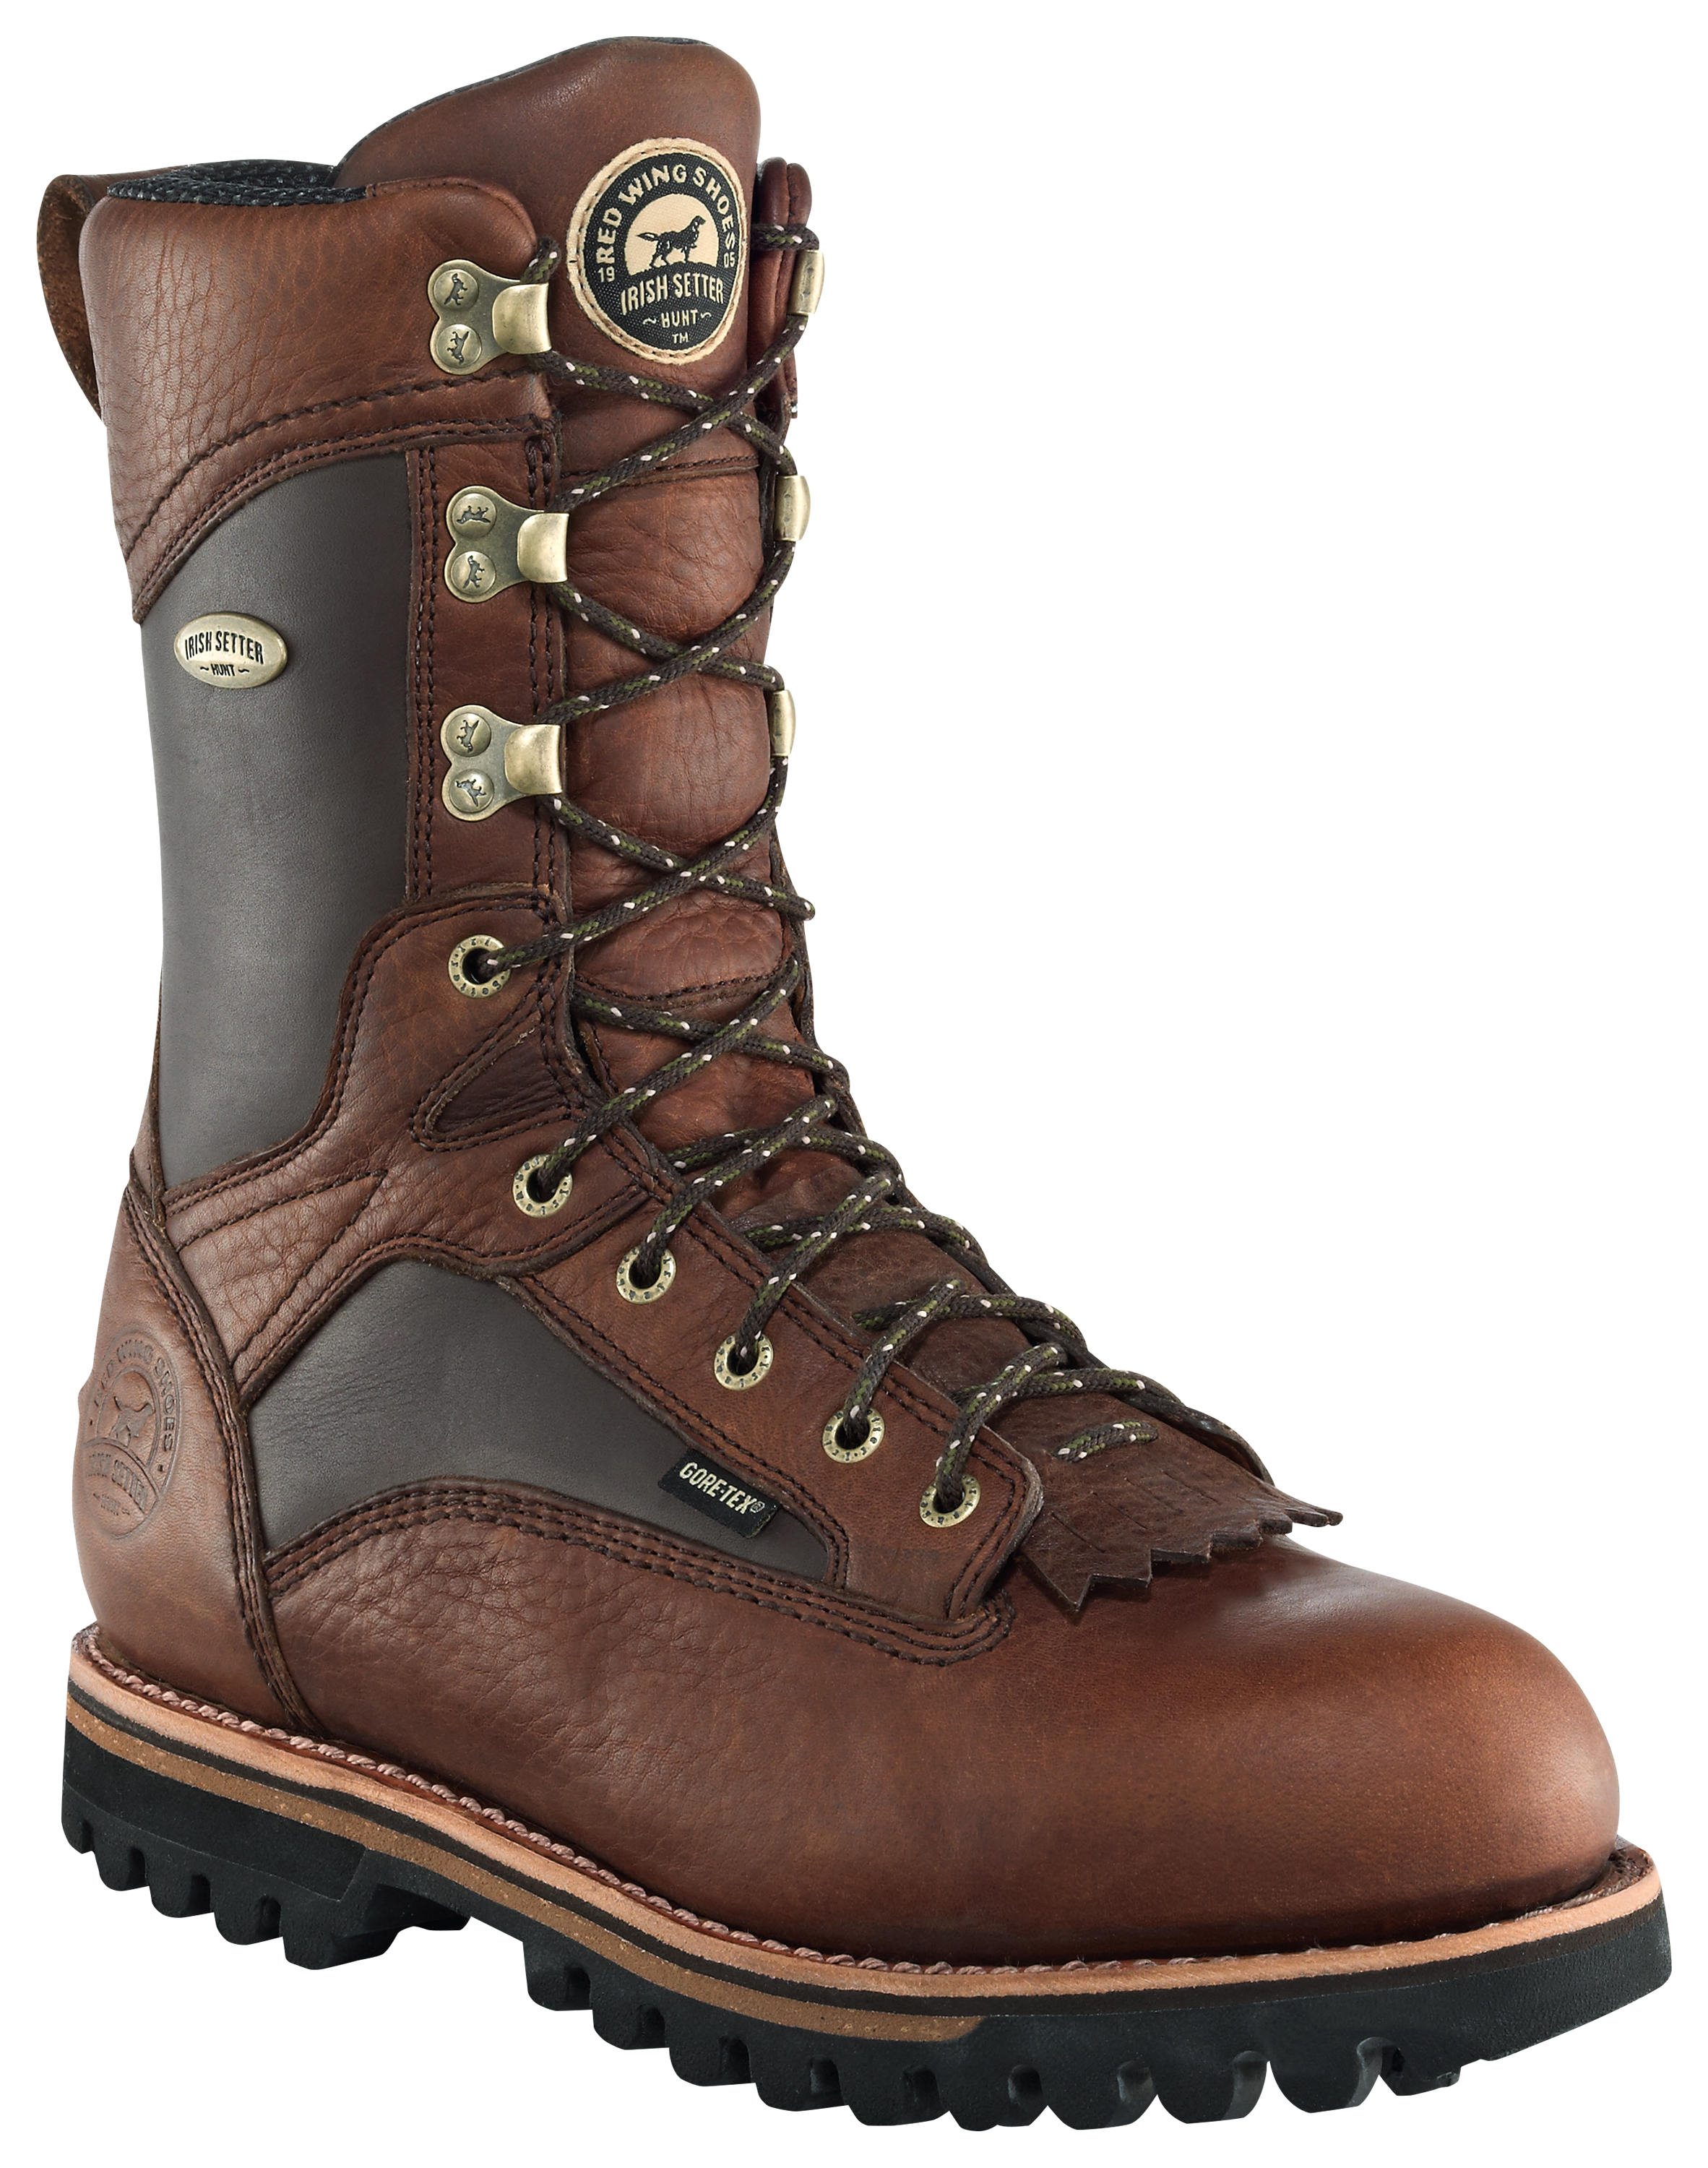 Irish Setter Elk Tracker 12'' 600 Gram Thinsulate Insulated Waterproof Hunting Boots for Men - Brown - 15 Wide EE